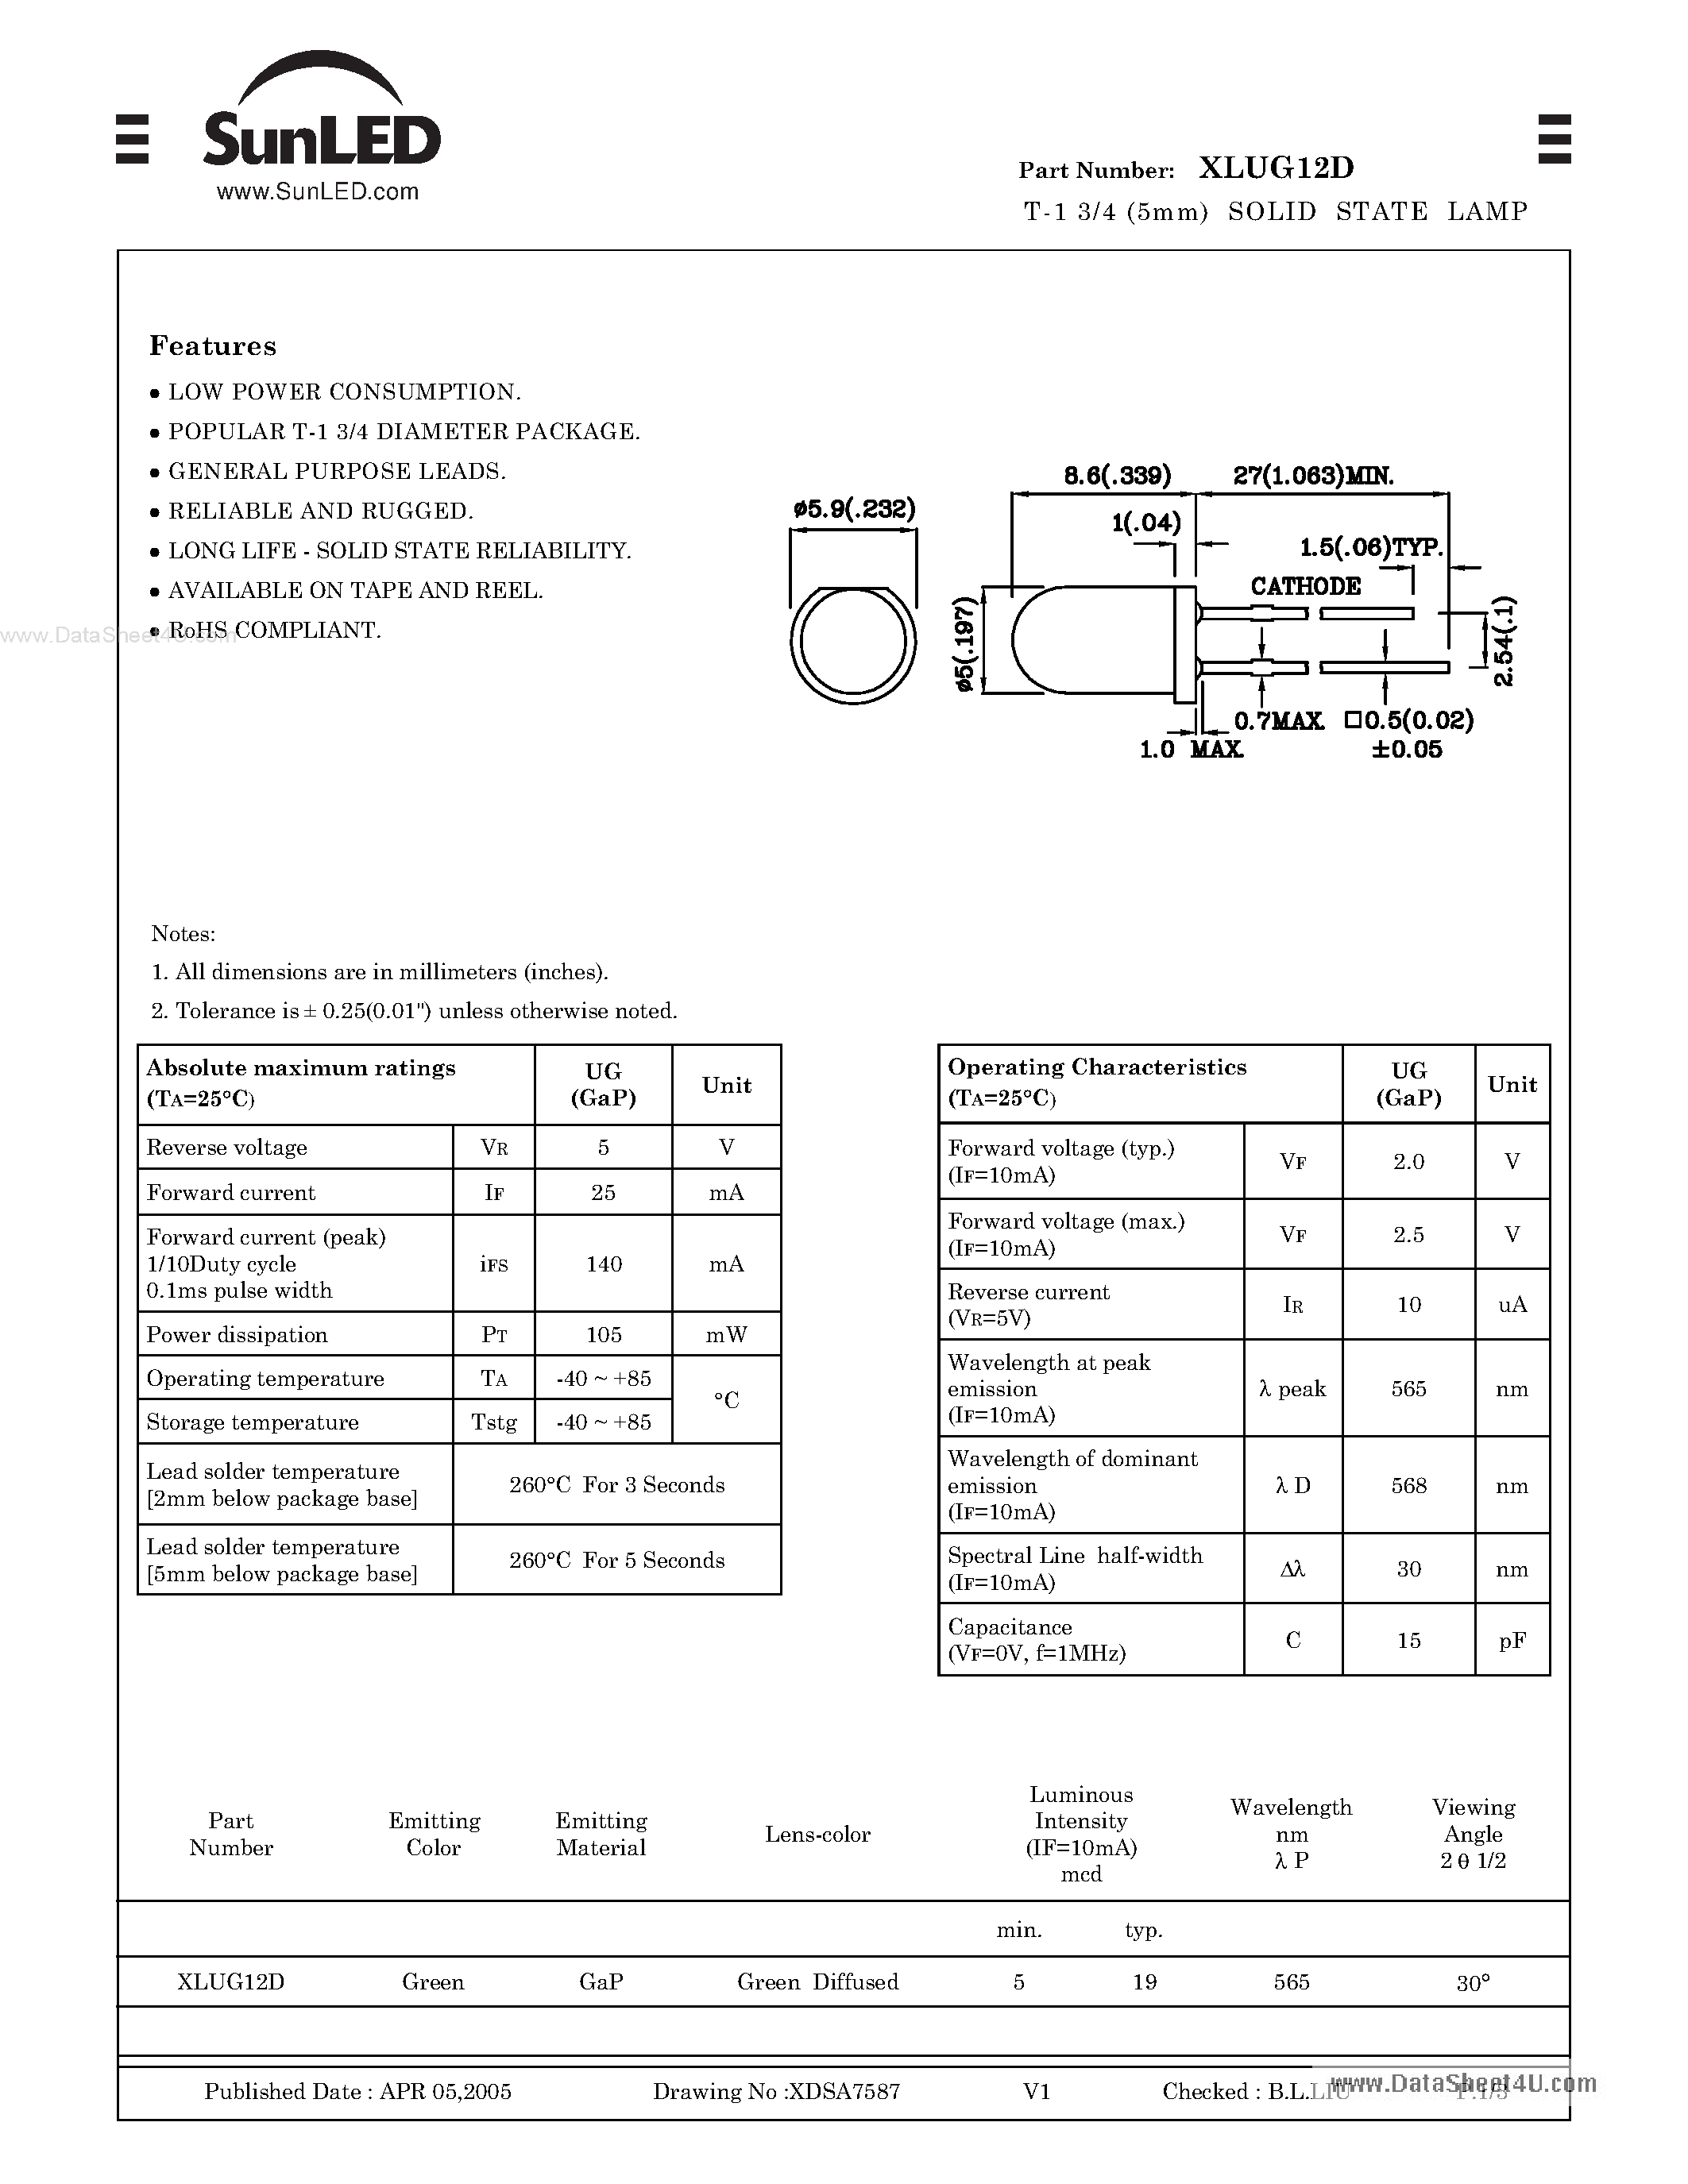 Datasheet XLUG12D - T-1 3/4 (5mm) SOLID STATE LAMP page 1